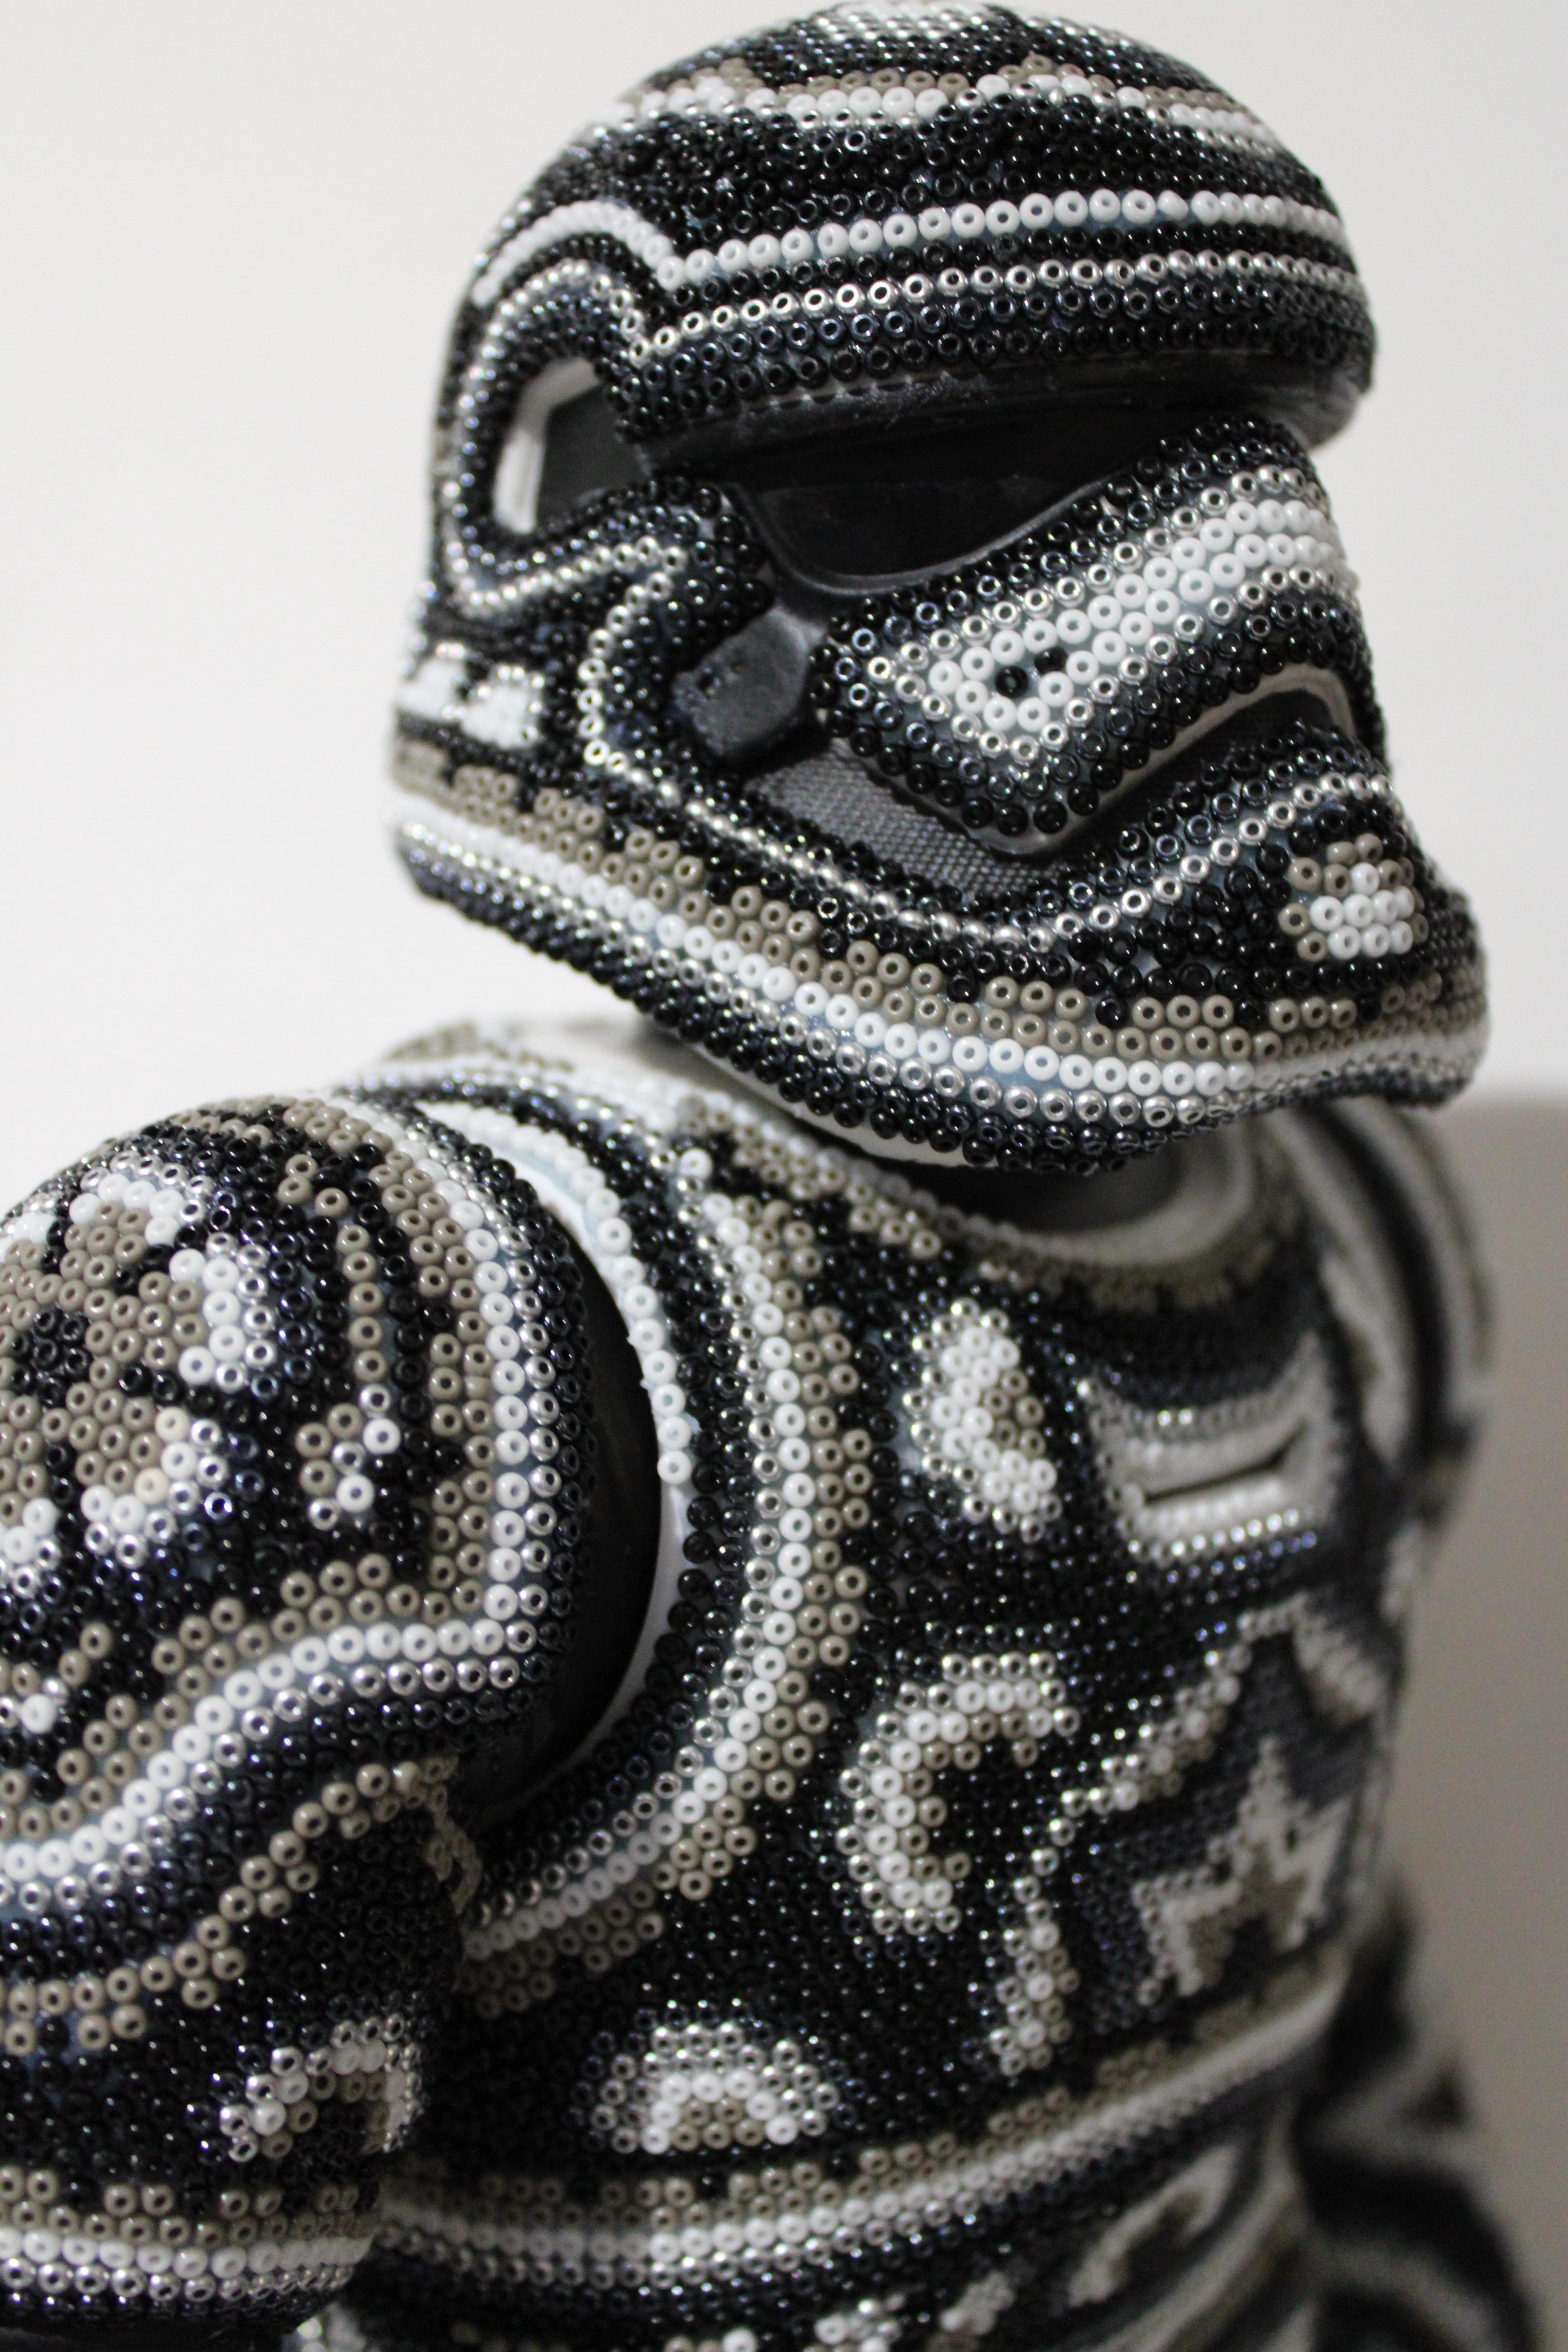 CHROMA aka Rick Wolfryd  Figurative Sculpture - "Stormtrooper" from Huichol ALTERATIONS Series